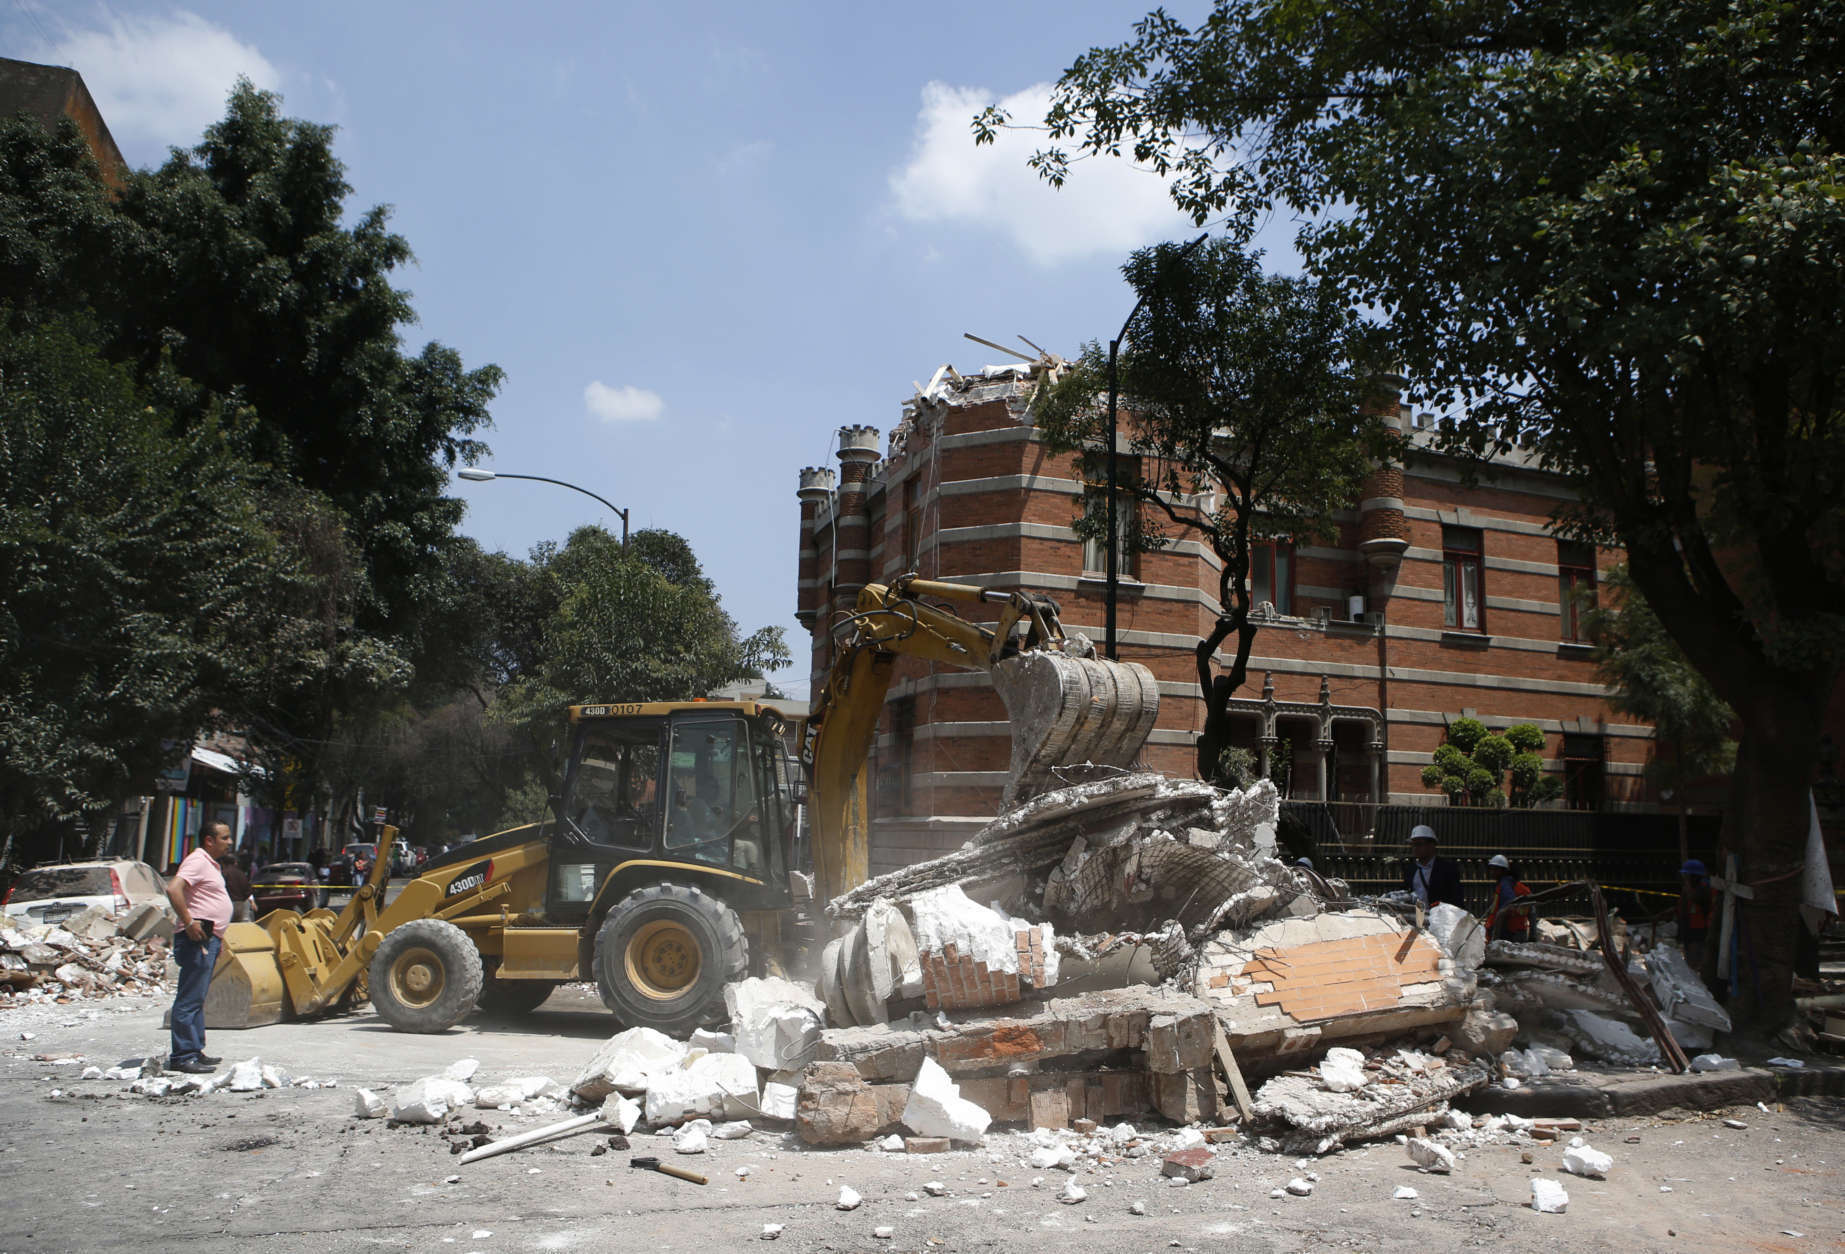 A bulldozer removes debris from a partially collapsed building after an earthquake in Mexico City, Tuesday, Sept. 19, 2017. A powerful earthquake jolted central Mexico on Tuesday, causing buildings to sway sickeningly in the capital on the anniversary of a 1985 quake that did major damage. (AP Photo/Rebecca Blackwell)